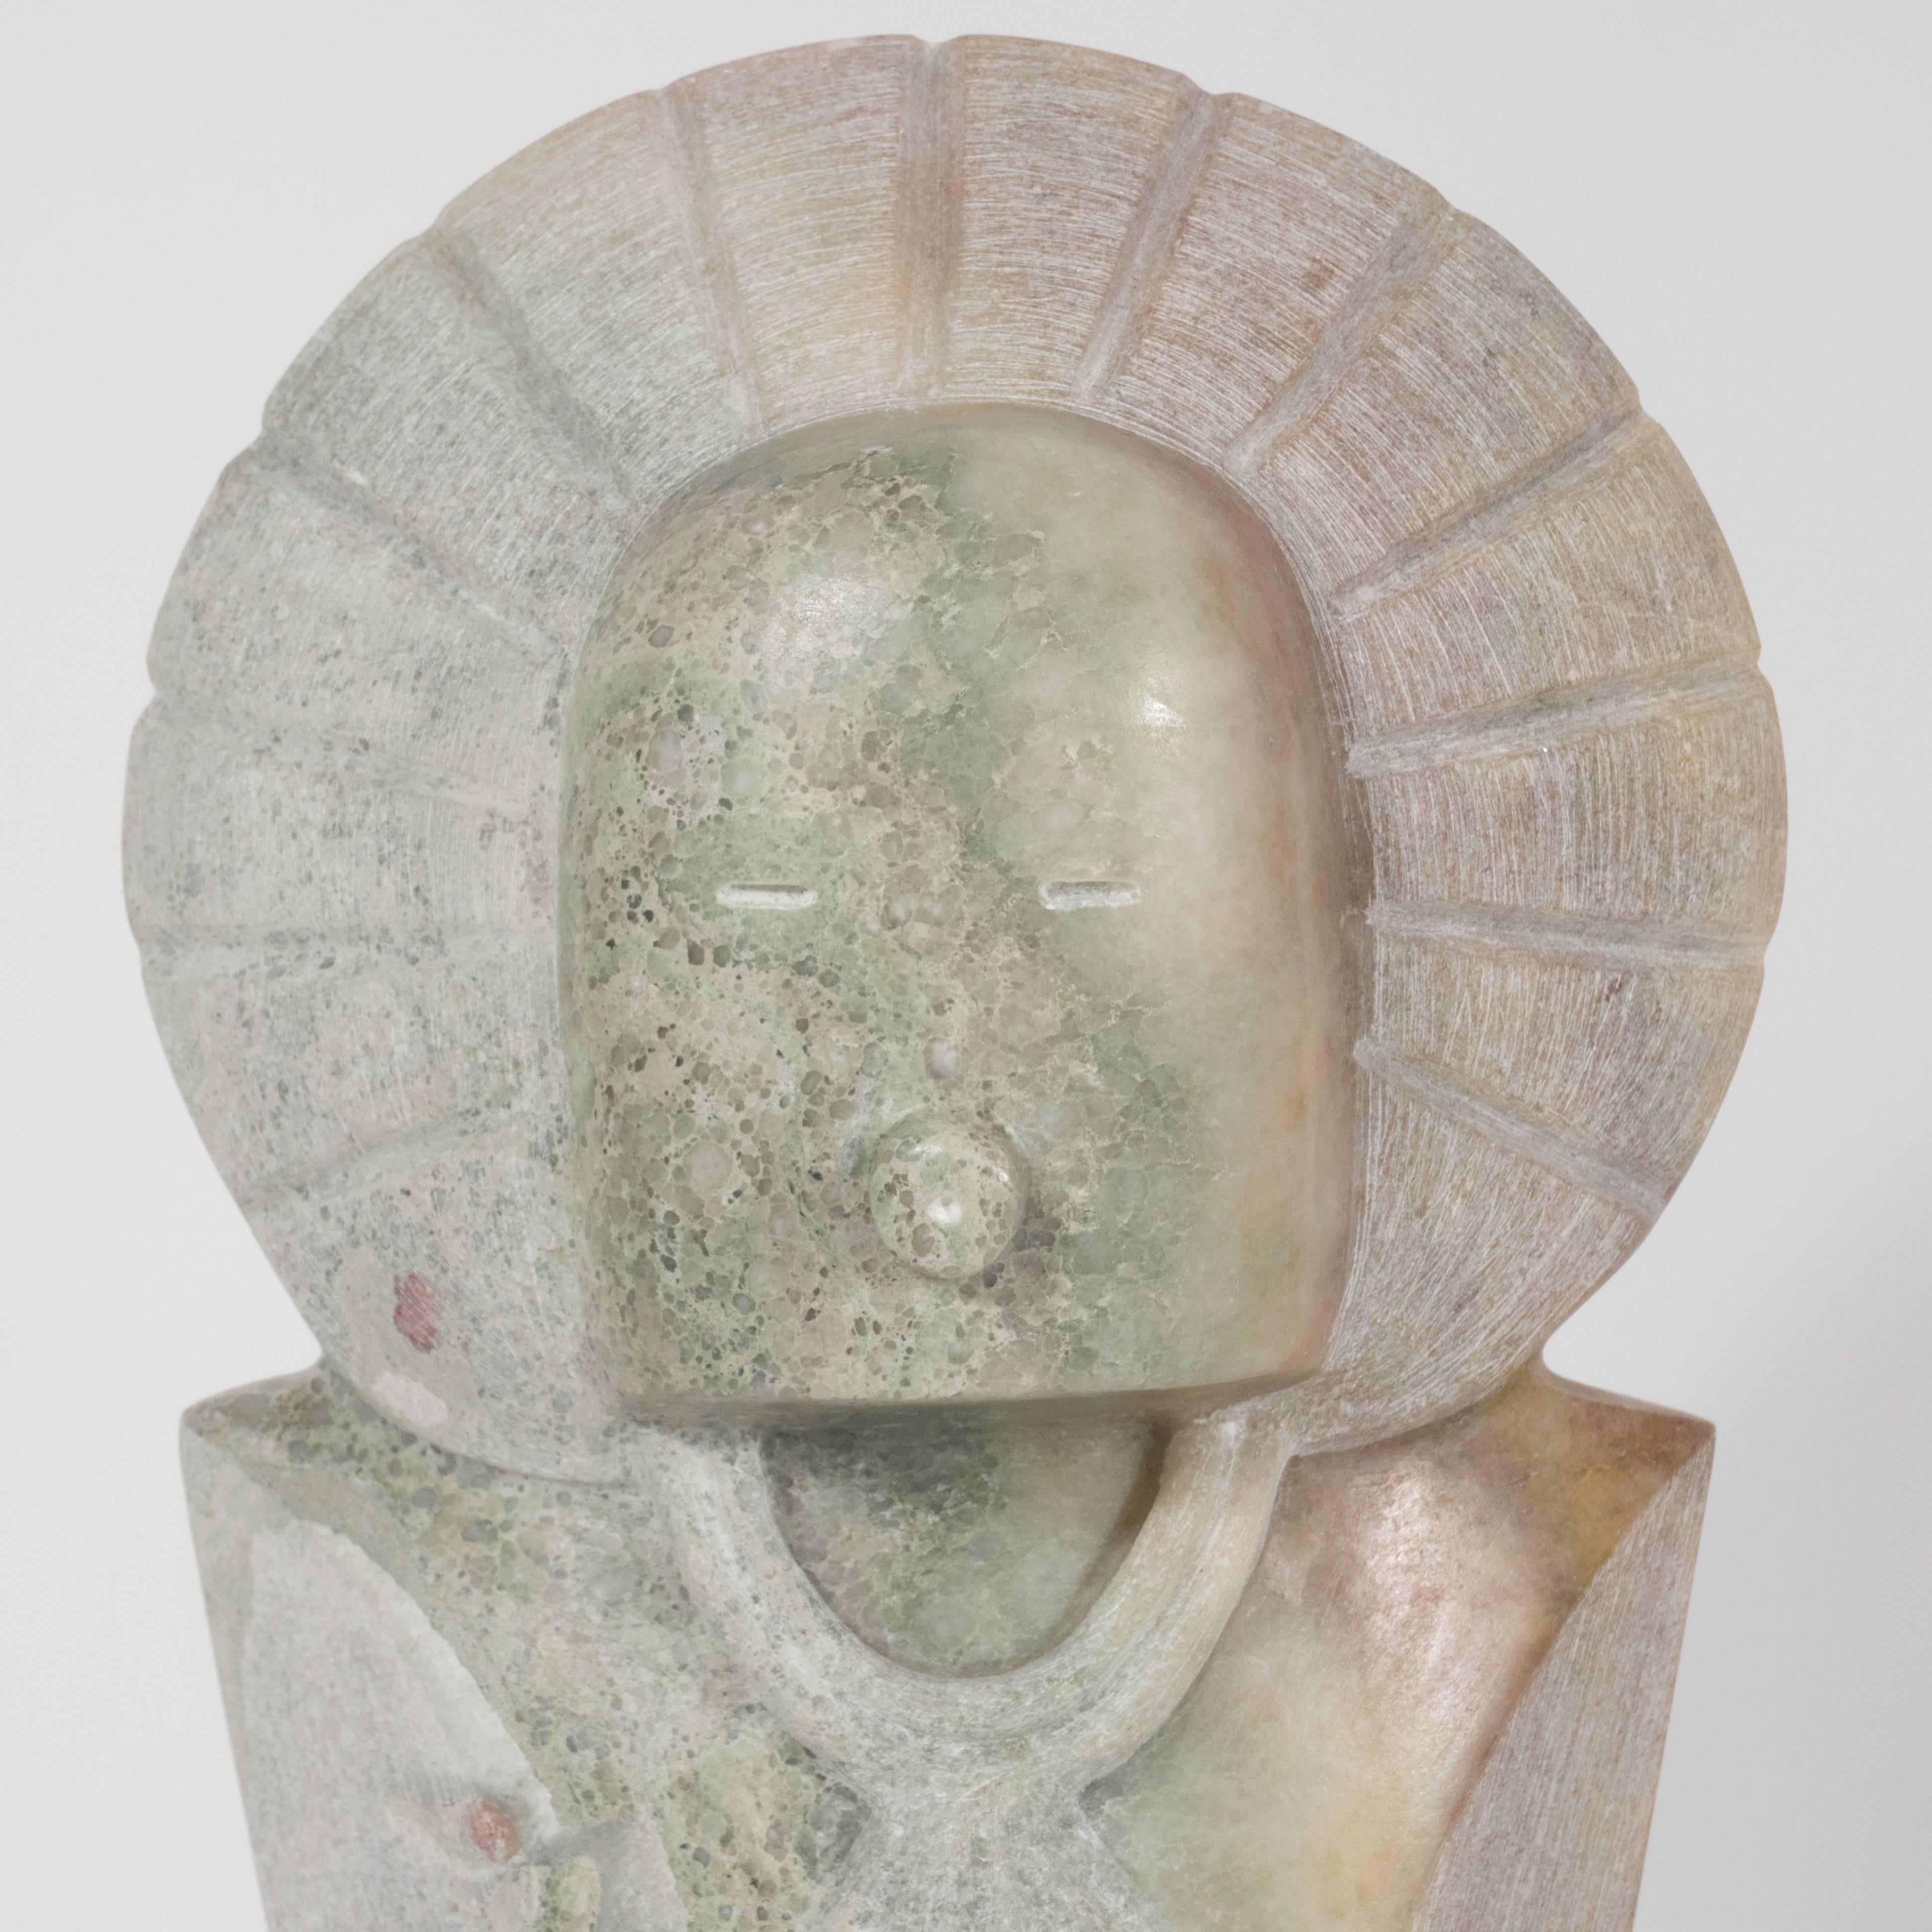 This sophisticated modernist sculpture was realized by acclaimed Southwestern sculptor R.D. Tsosie, whose work is represented in many esteemed public and private collections throughout the world, including at the Santa Fe state capitol. This piece